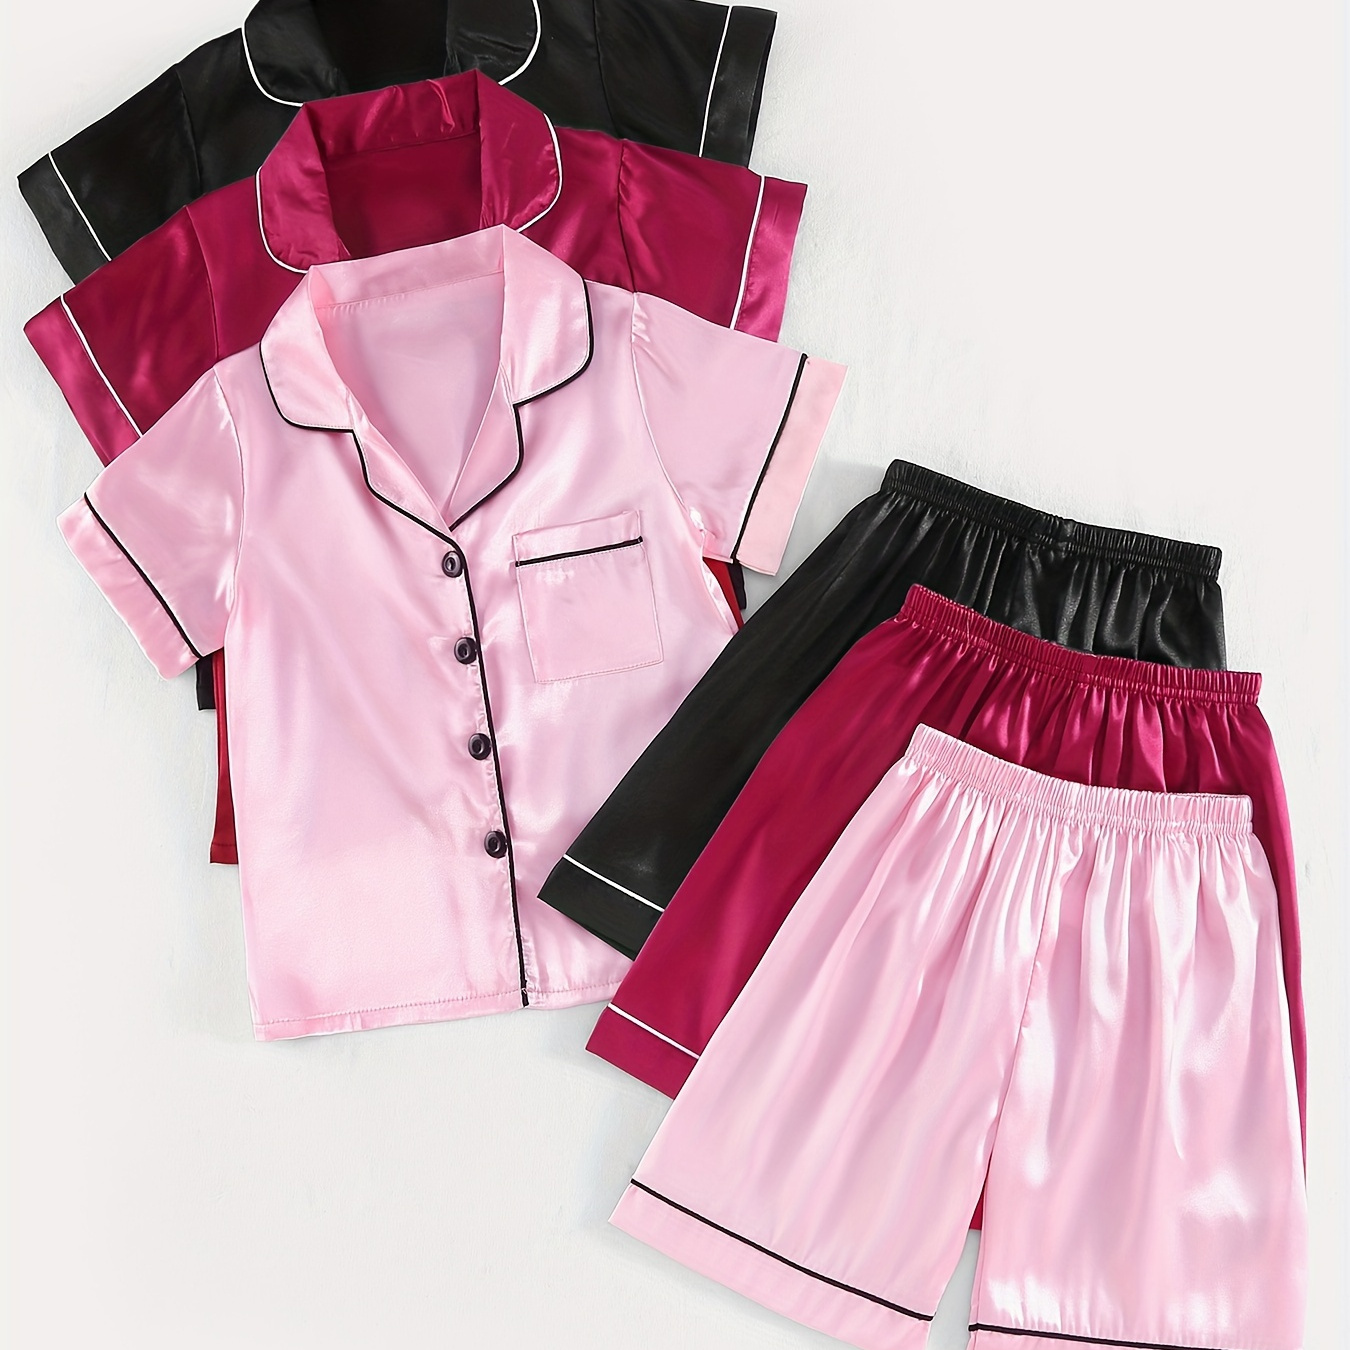 

Girls 6pcs Pajama Sets Solid Color Lapel Front Buckle Chest Pocket Short Sleeve Top & Matching Shorts Casual Pj Sets